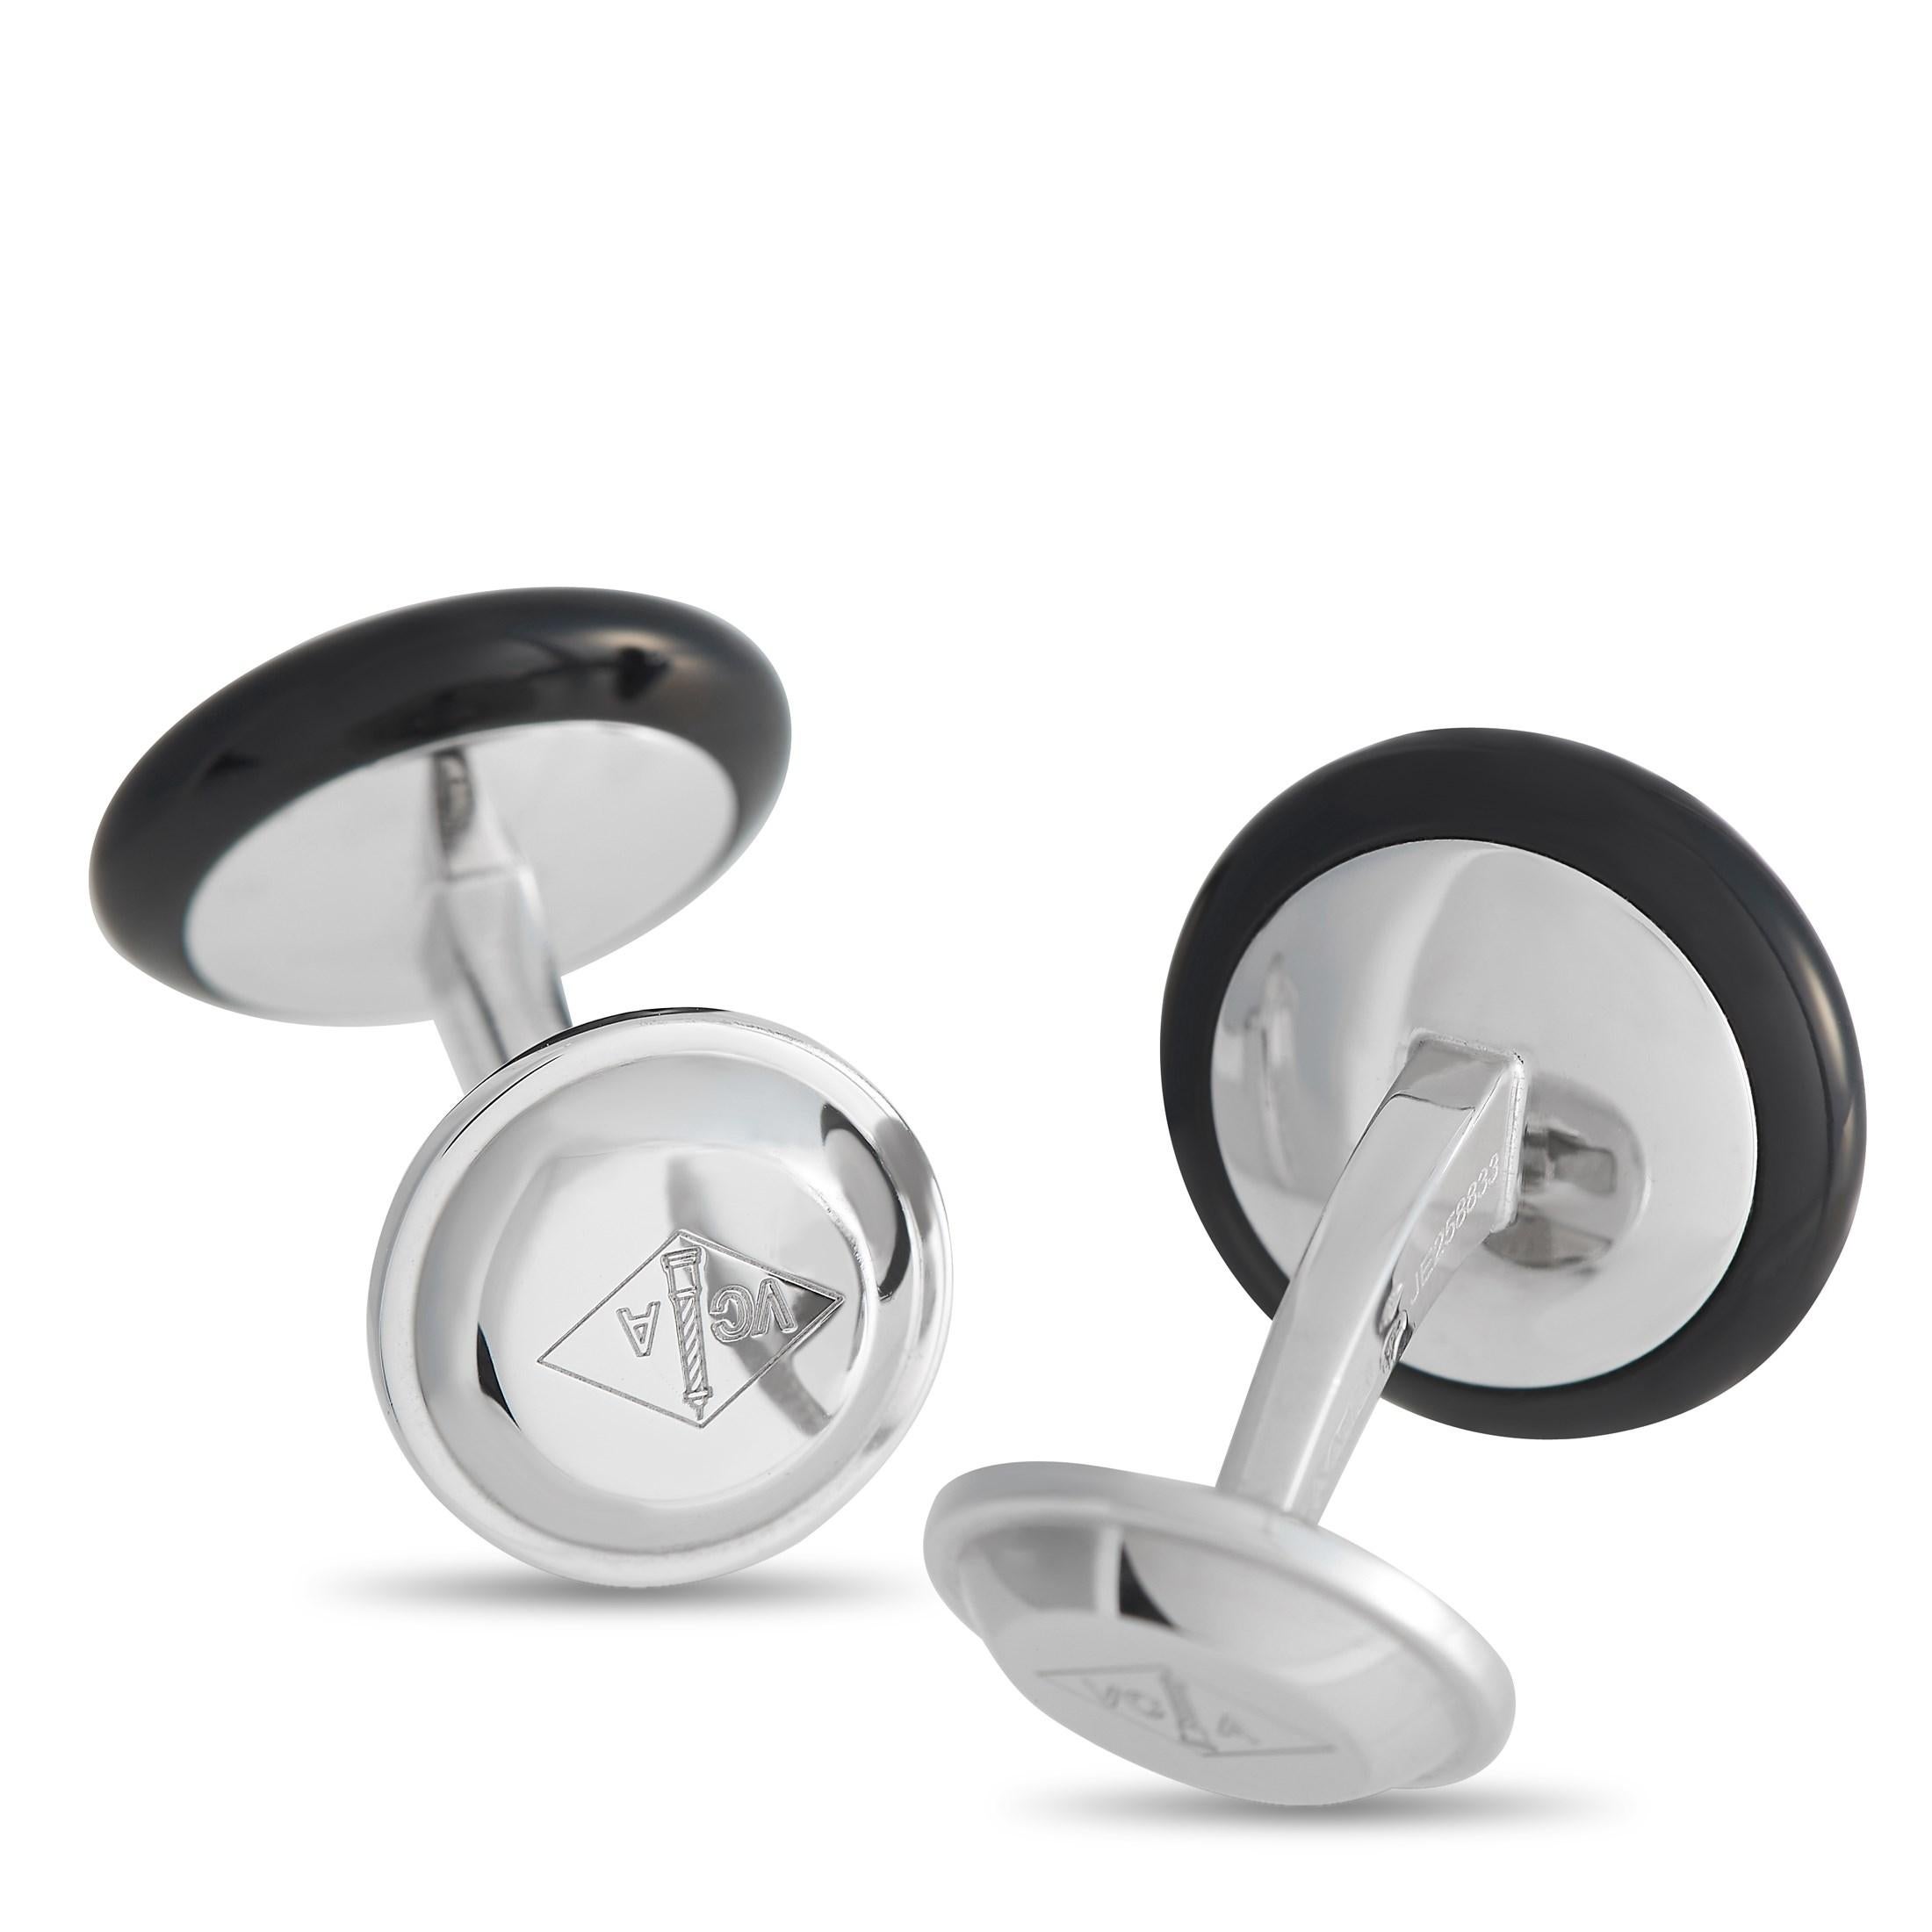 Wear this pair of Van Cleef & Arpels cufflinks from the Pierre Arpels Pastilles collection and look more put together while they hold your shirt cuffs together. Designed to exude a timeless sense of elegance, these white gold cufflinks bear two